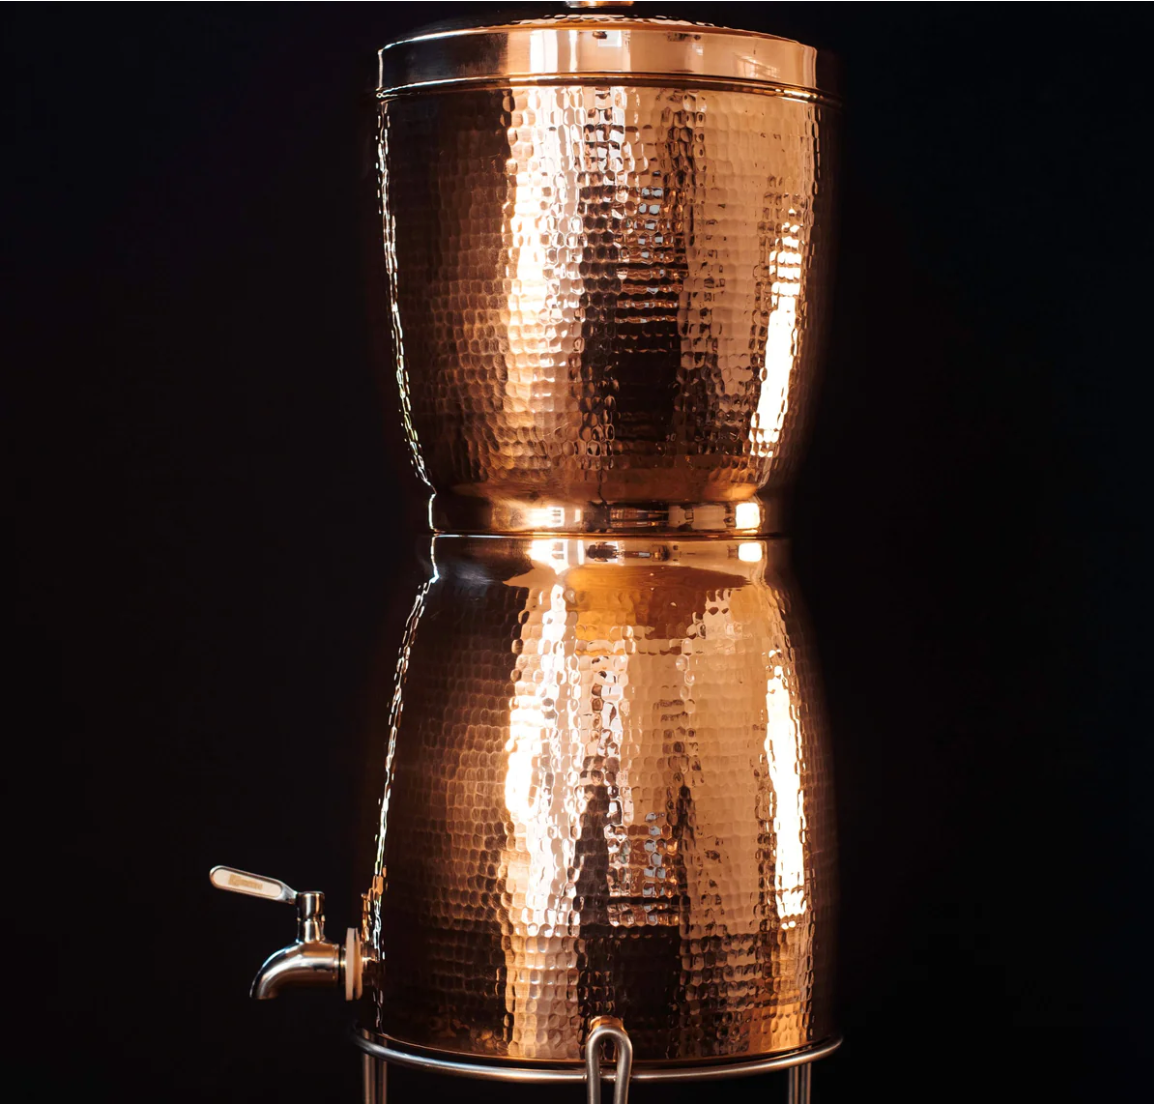 Copper Water Filter System